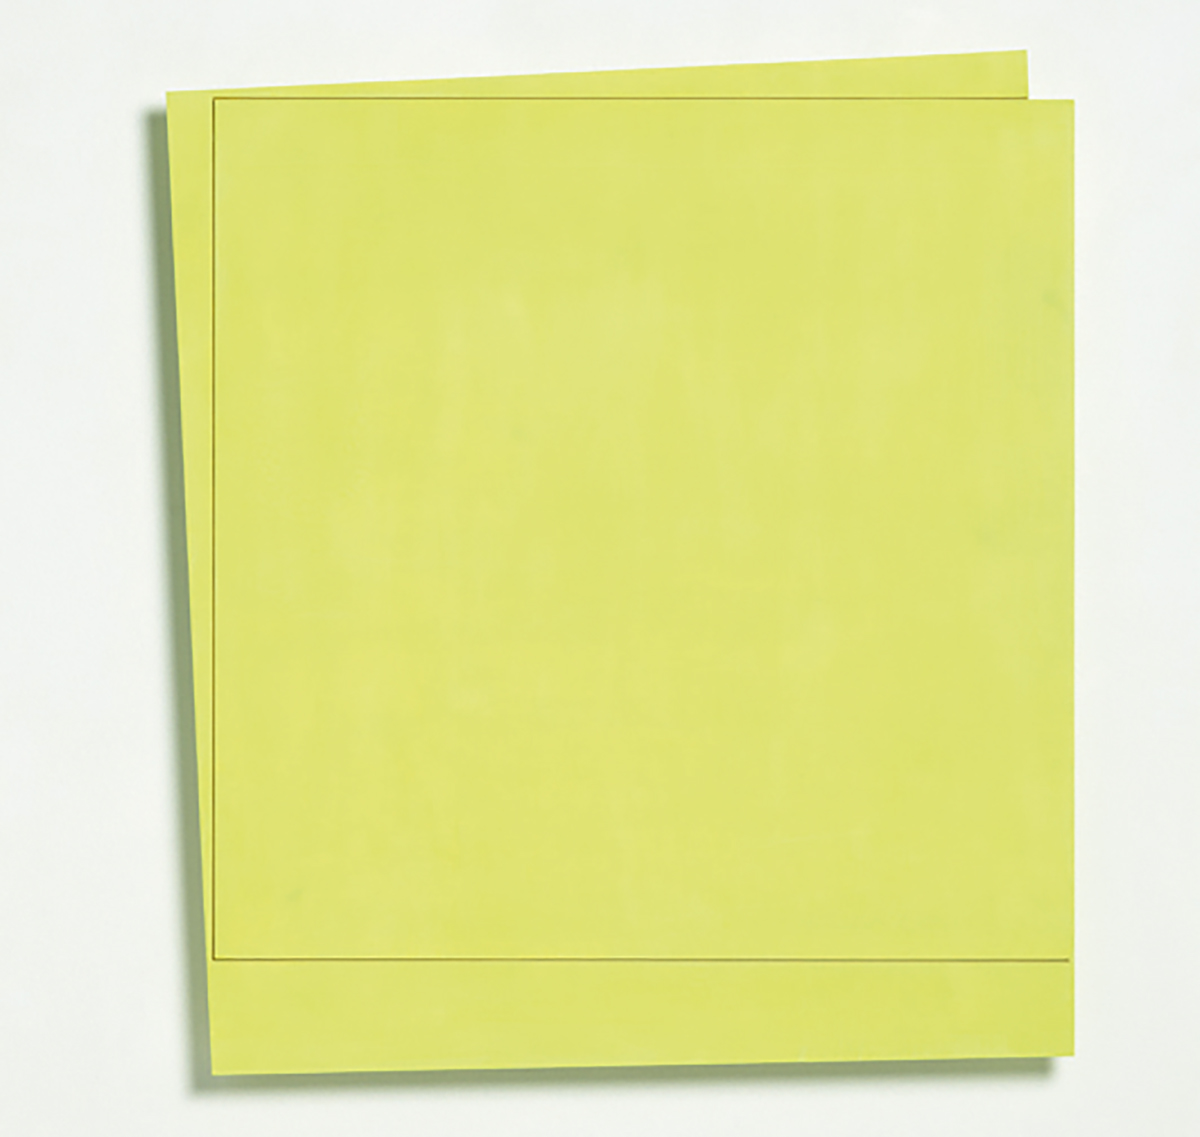 Folded Rectangle, with Square (Yellow), 201189 x 79 x 4,8 cmAcrylic with marble powder on plywood